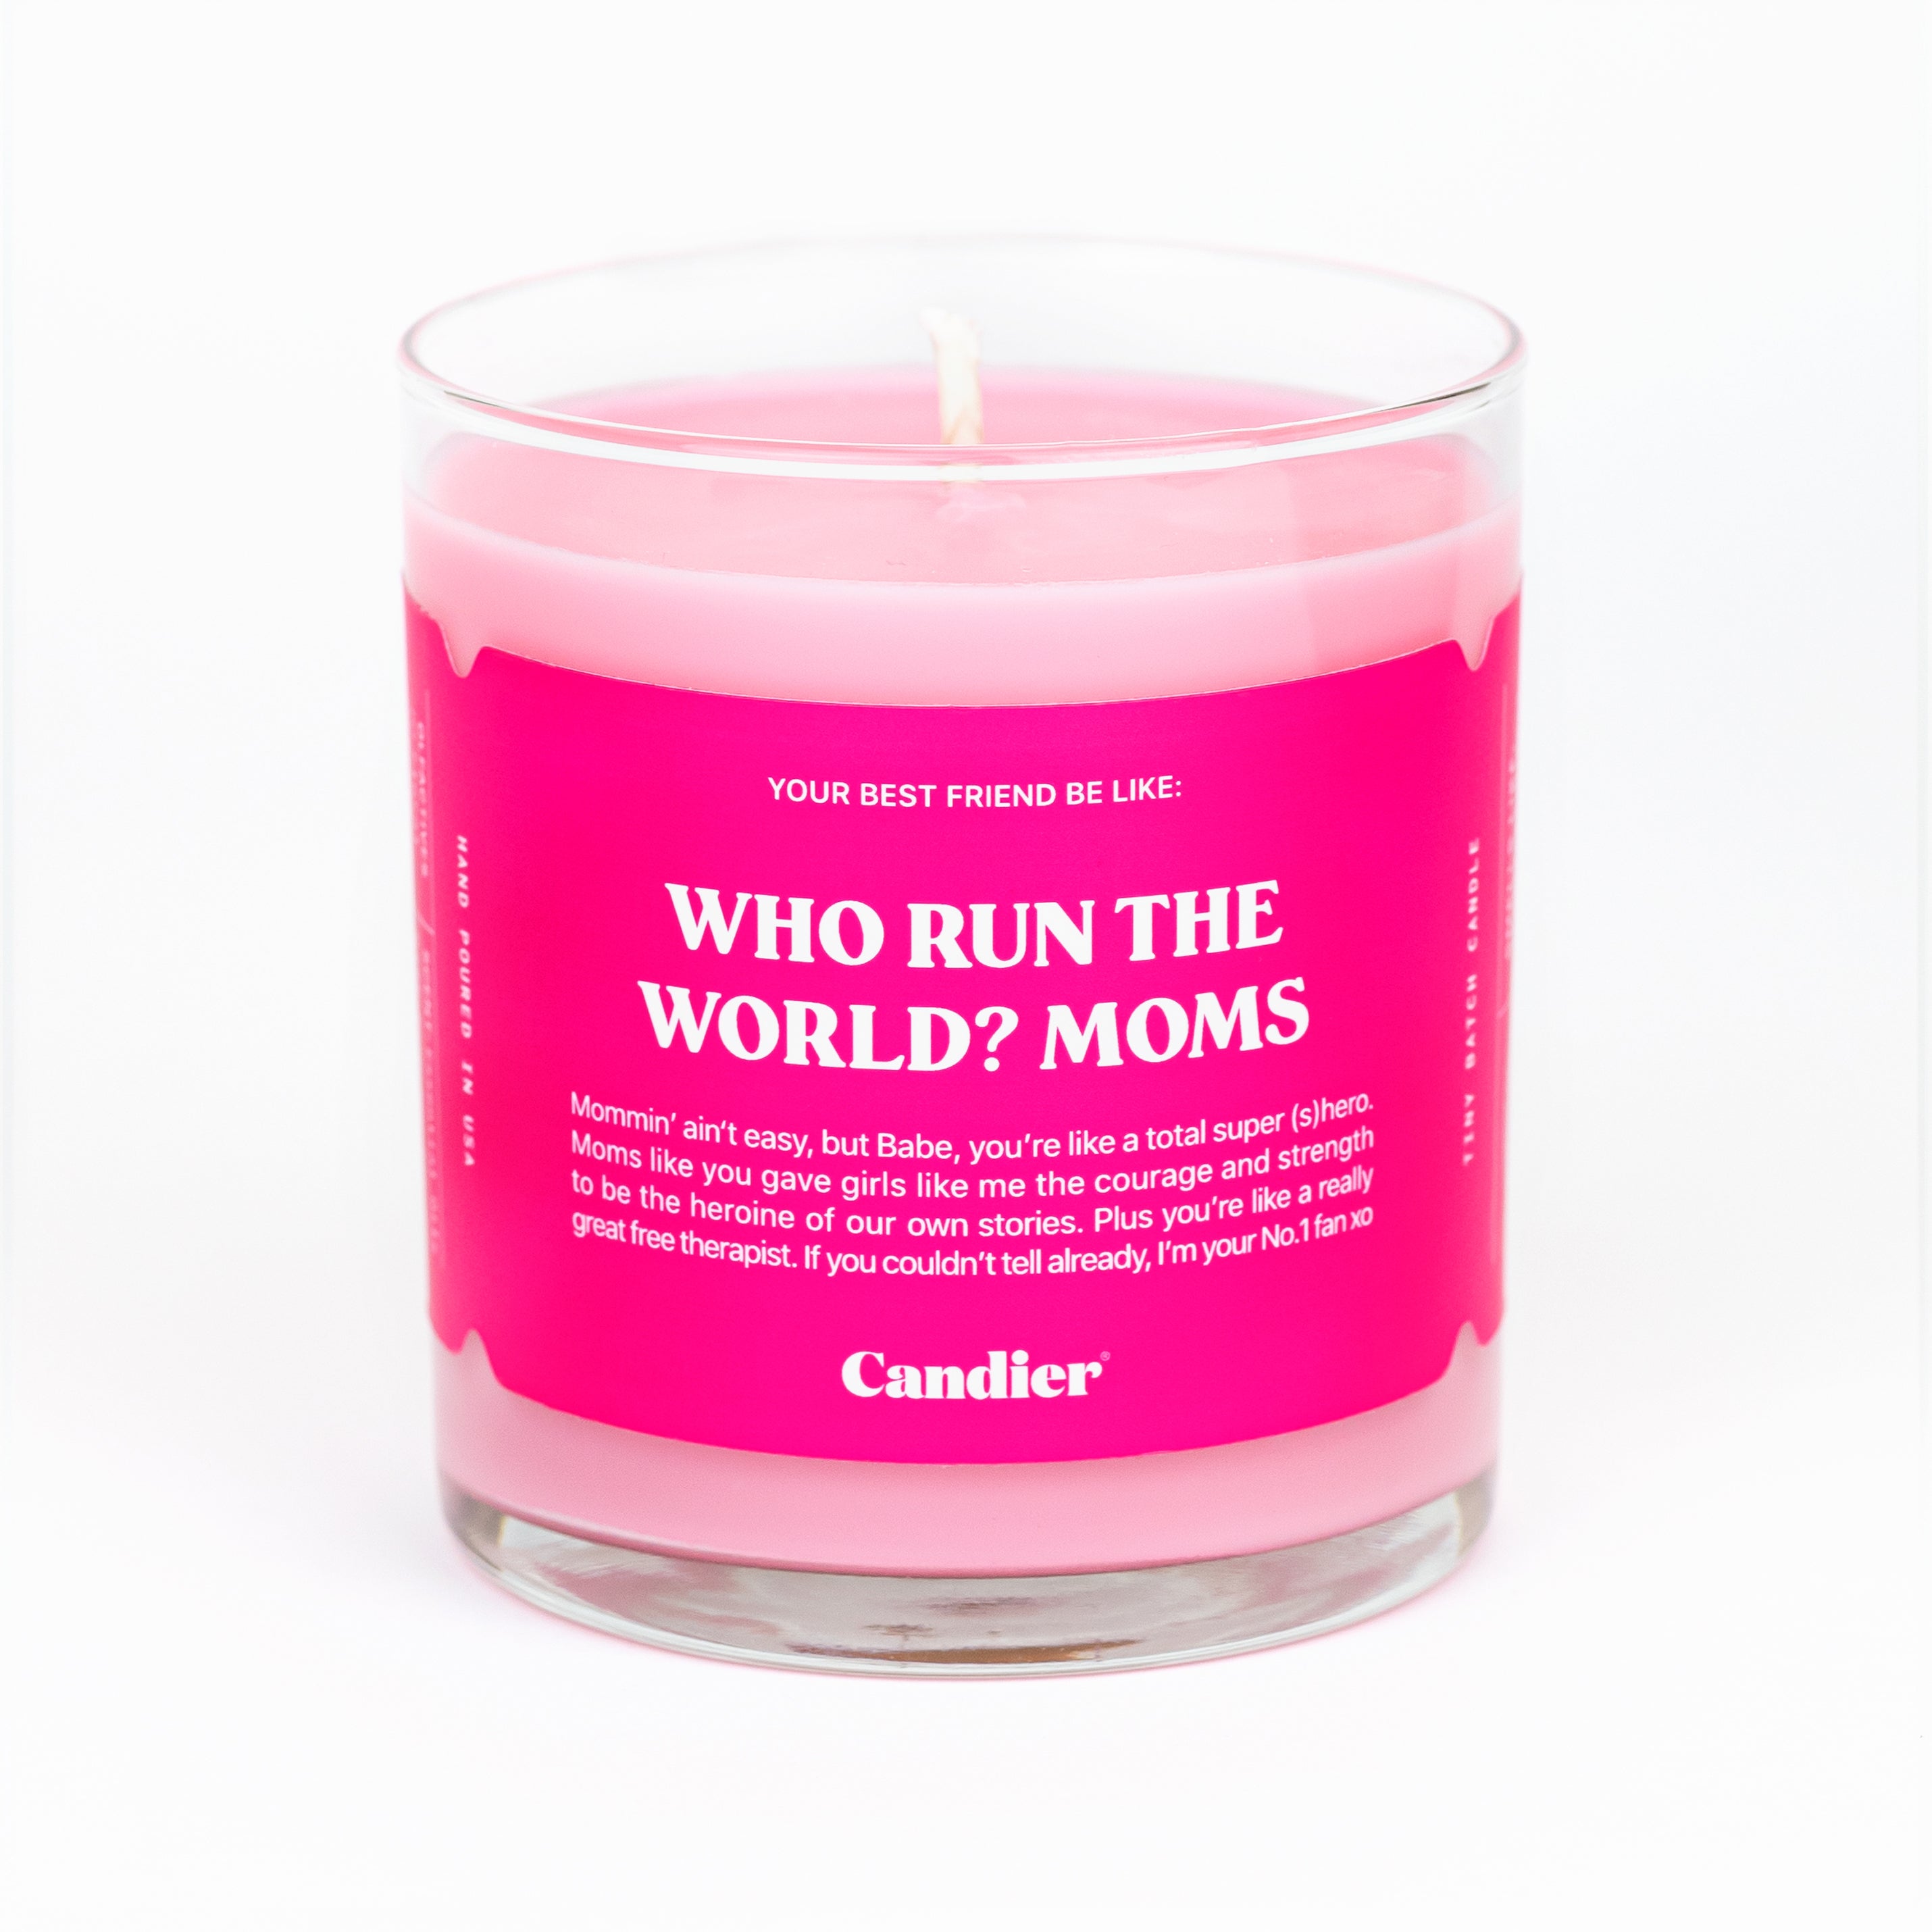 Great Mom Candle